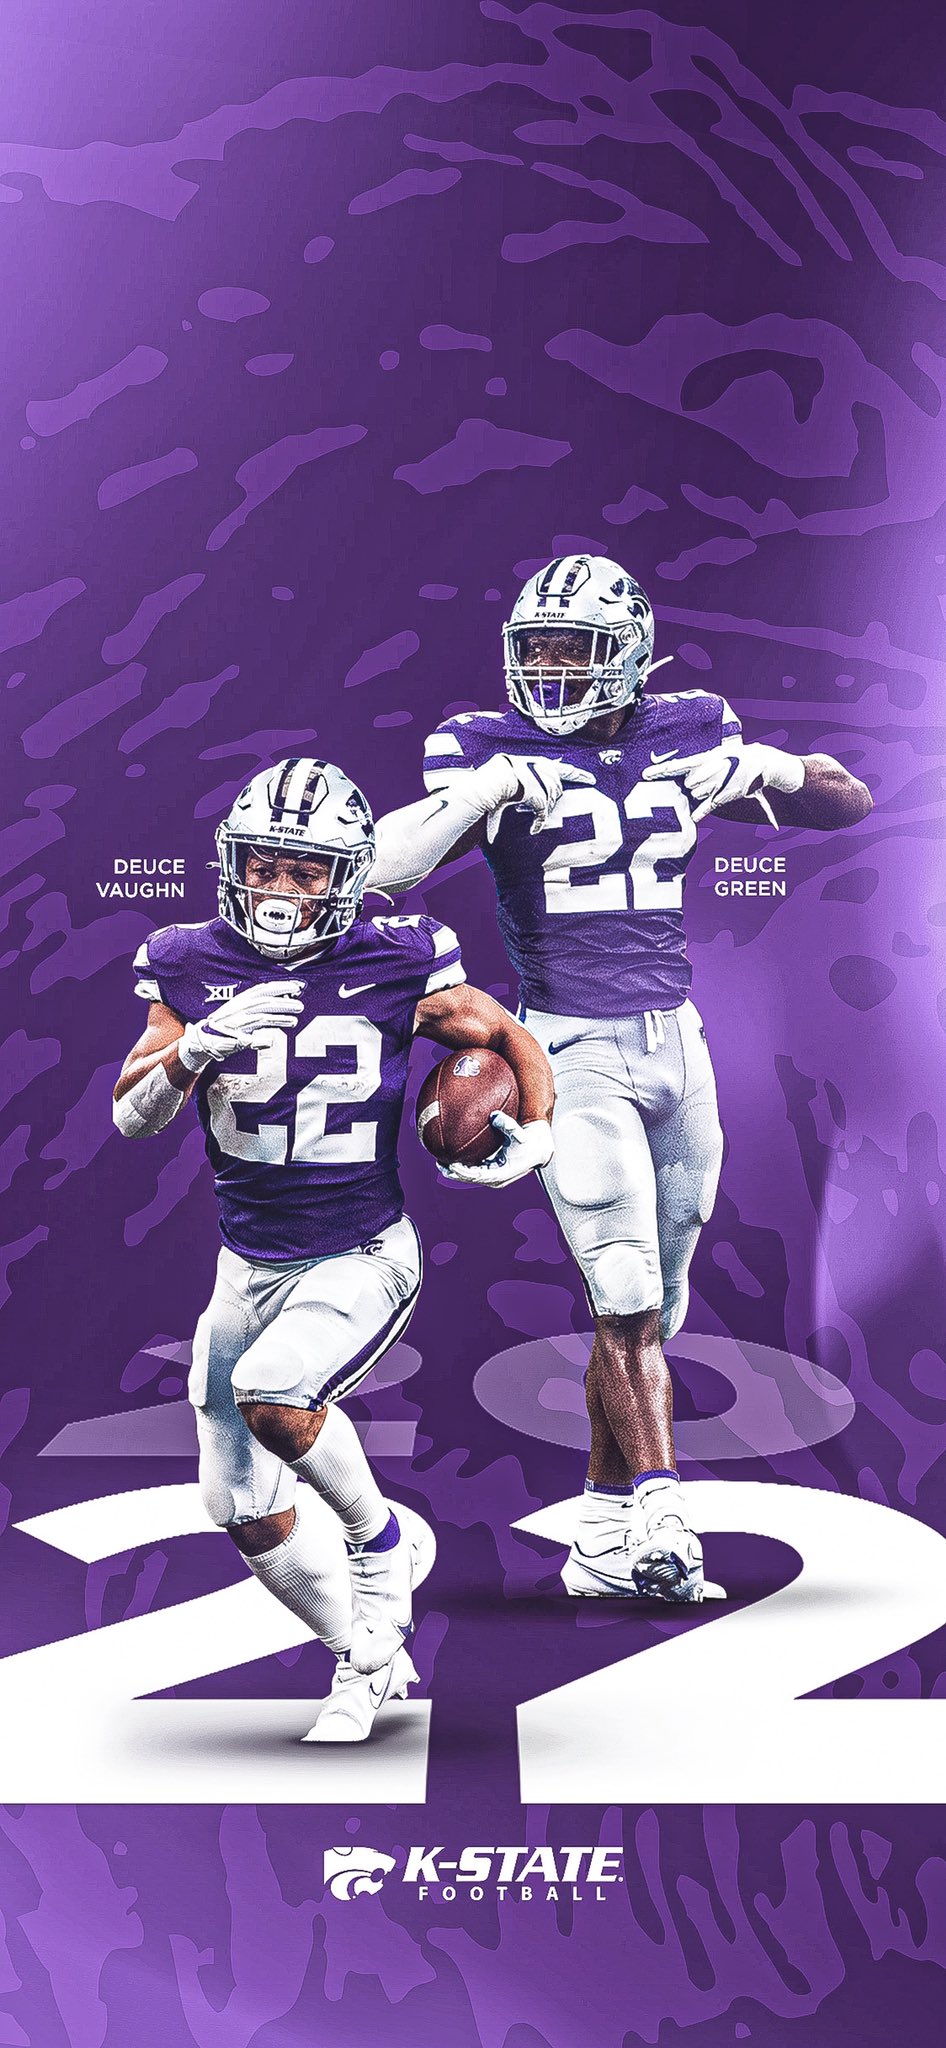 Download wallpapers Kansas State Wildcats 4k american football team  NCAA violet white stone USA asphalt texture american football Kansas  State Wildcats logo for desktop free Pictures for desktop free